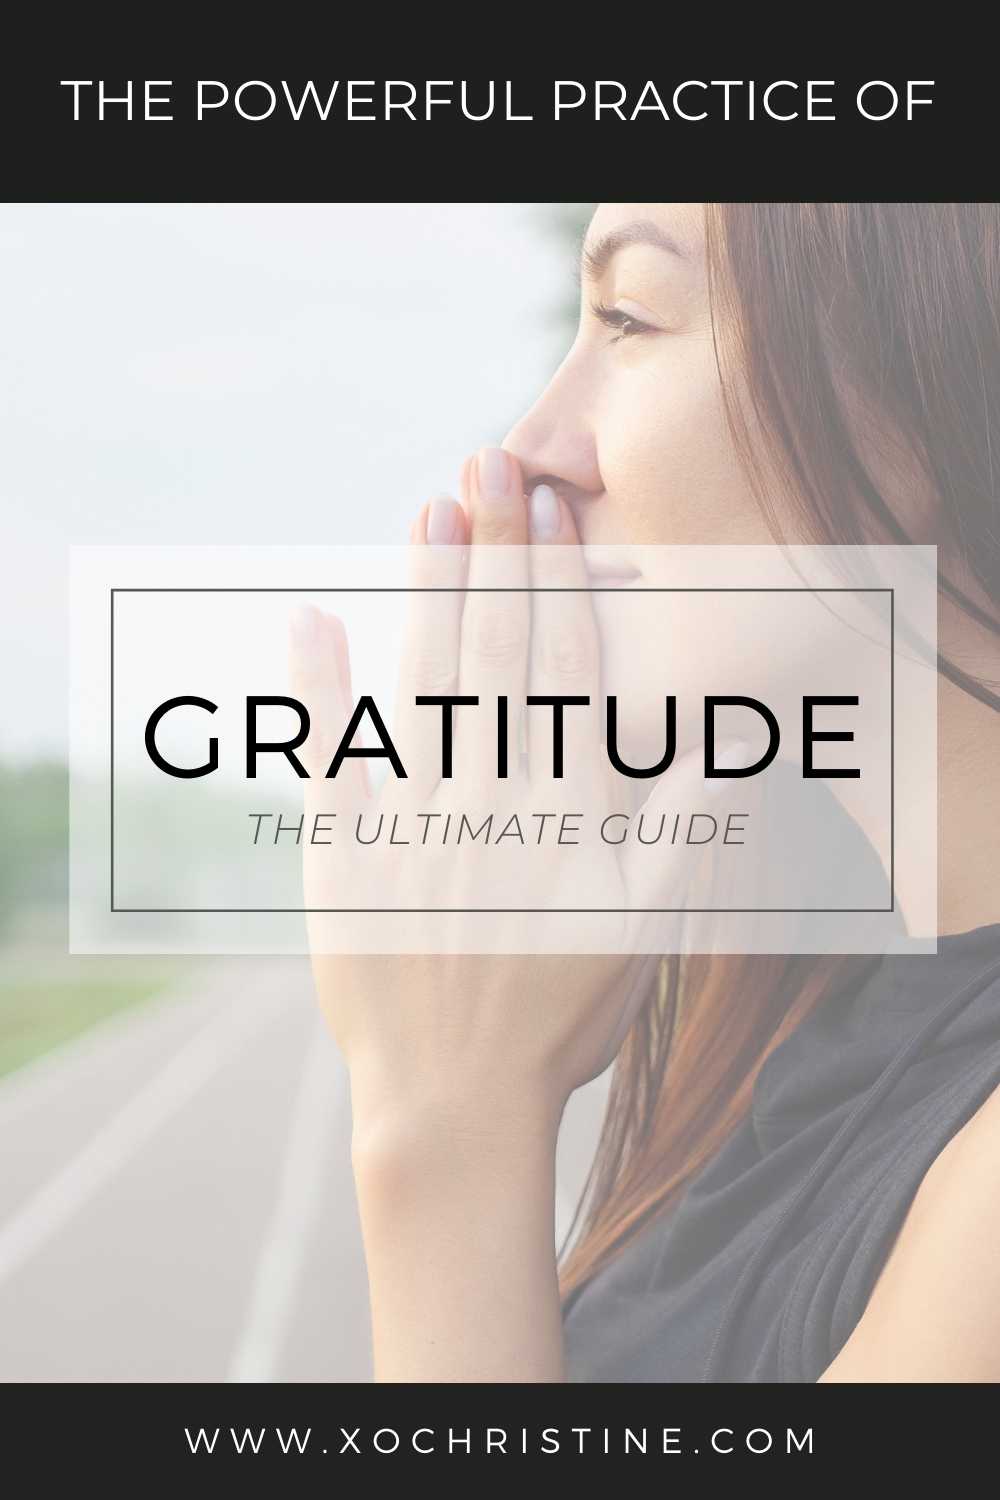 How to practice gratitude every day (a step-by-step guide) 2021